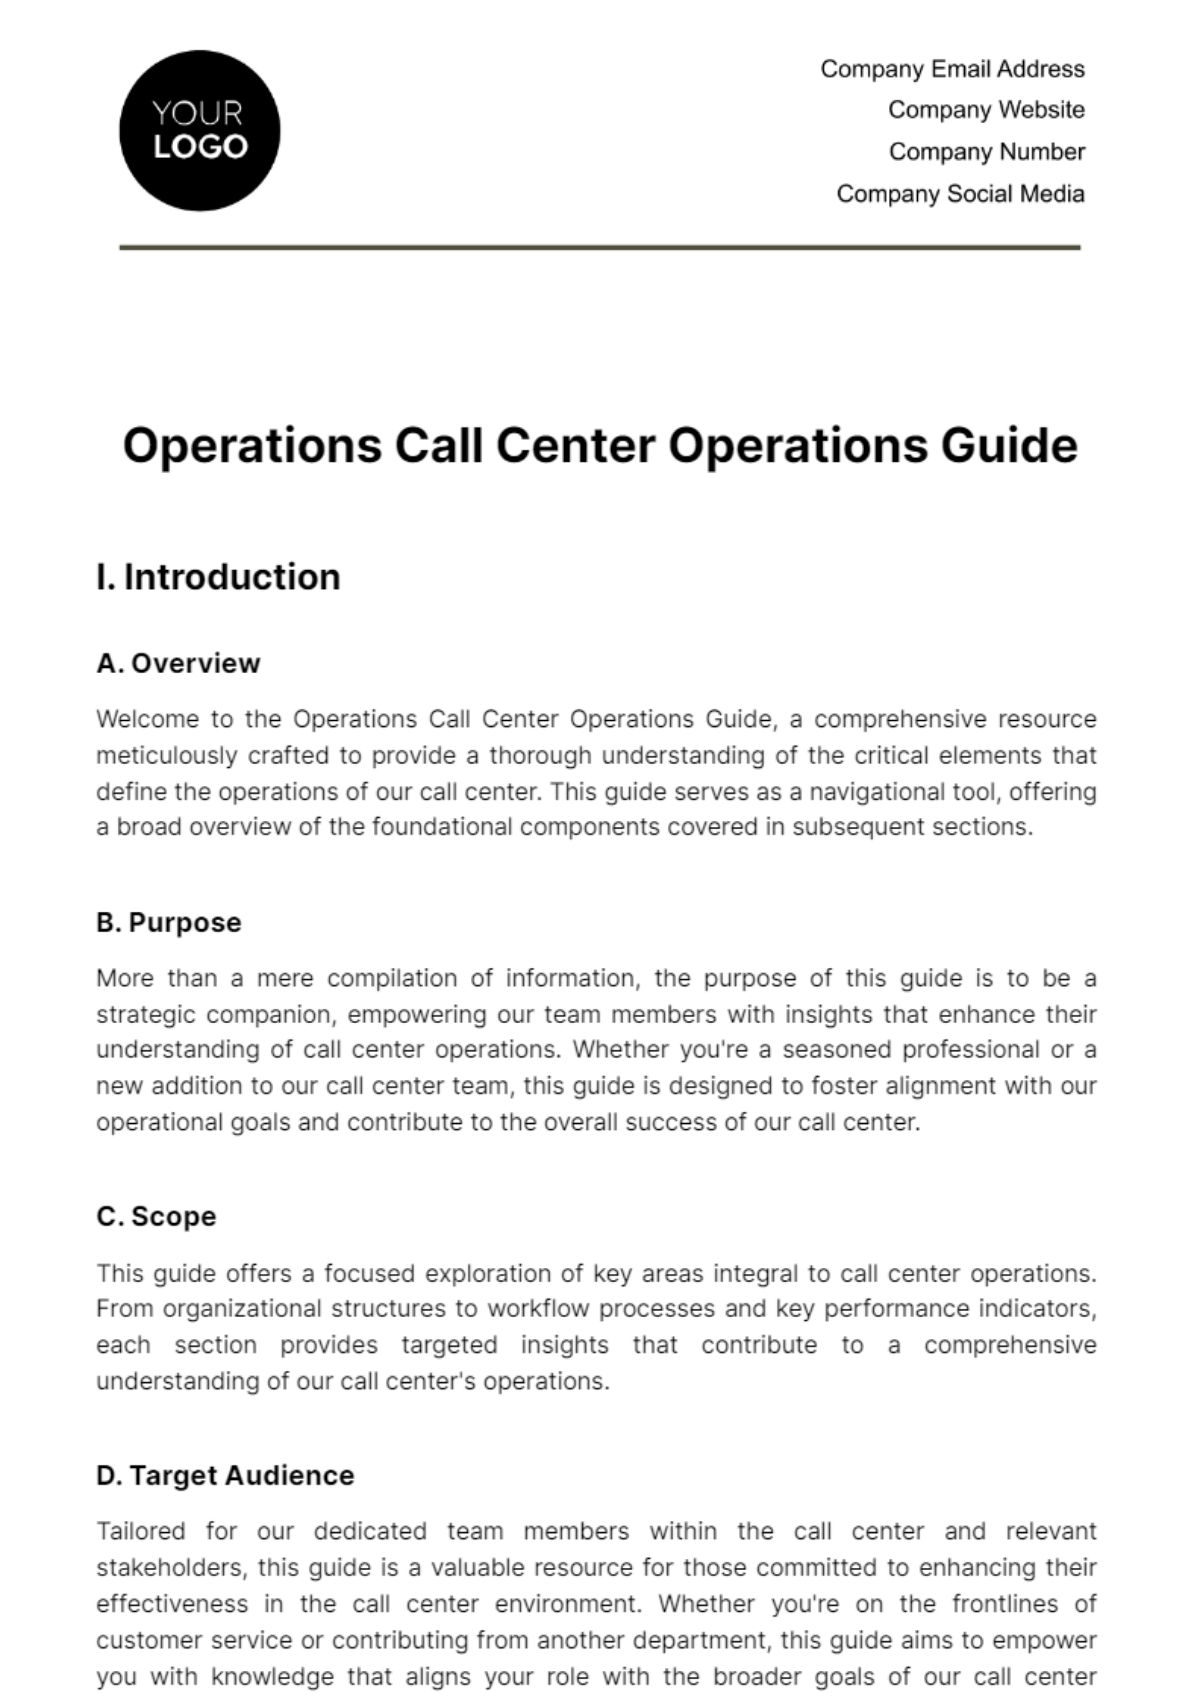 Free Operations Call Center Operations Guide Template